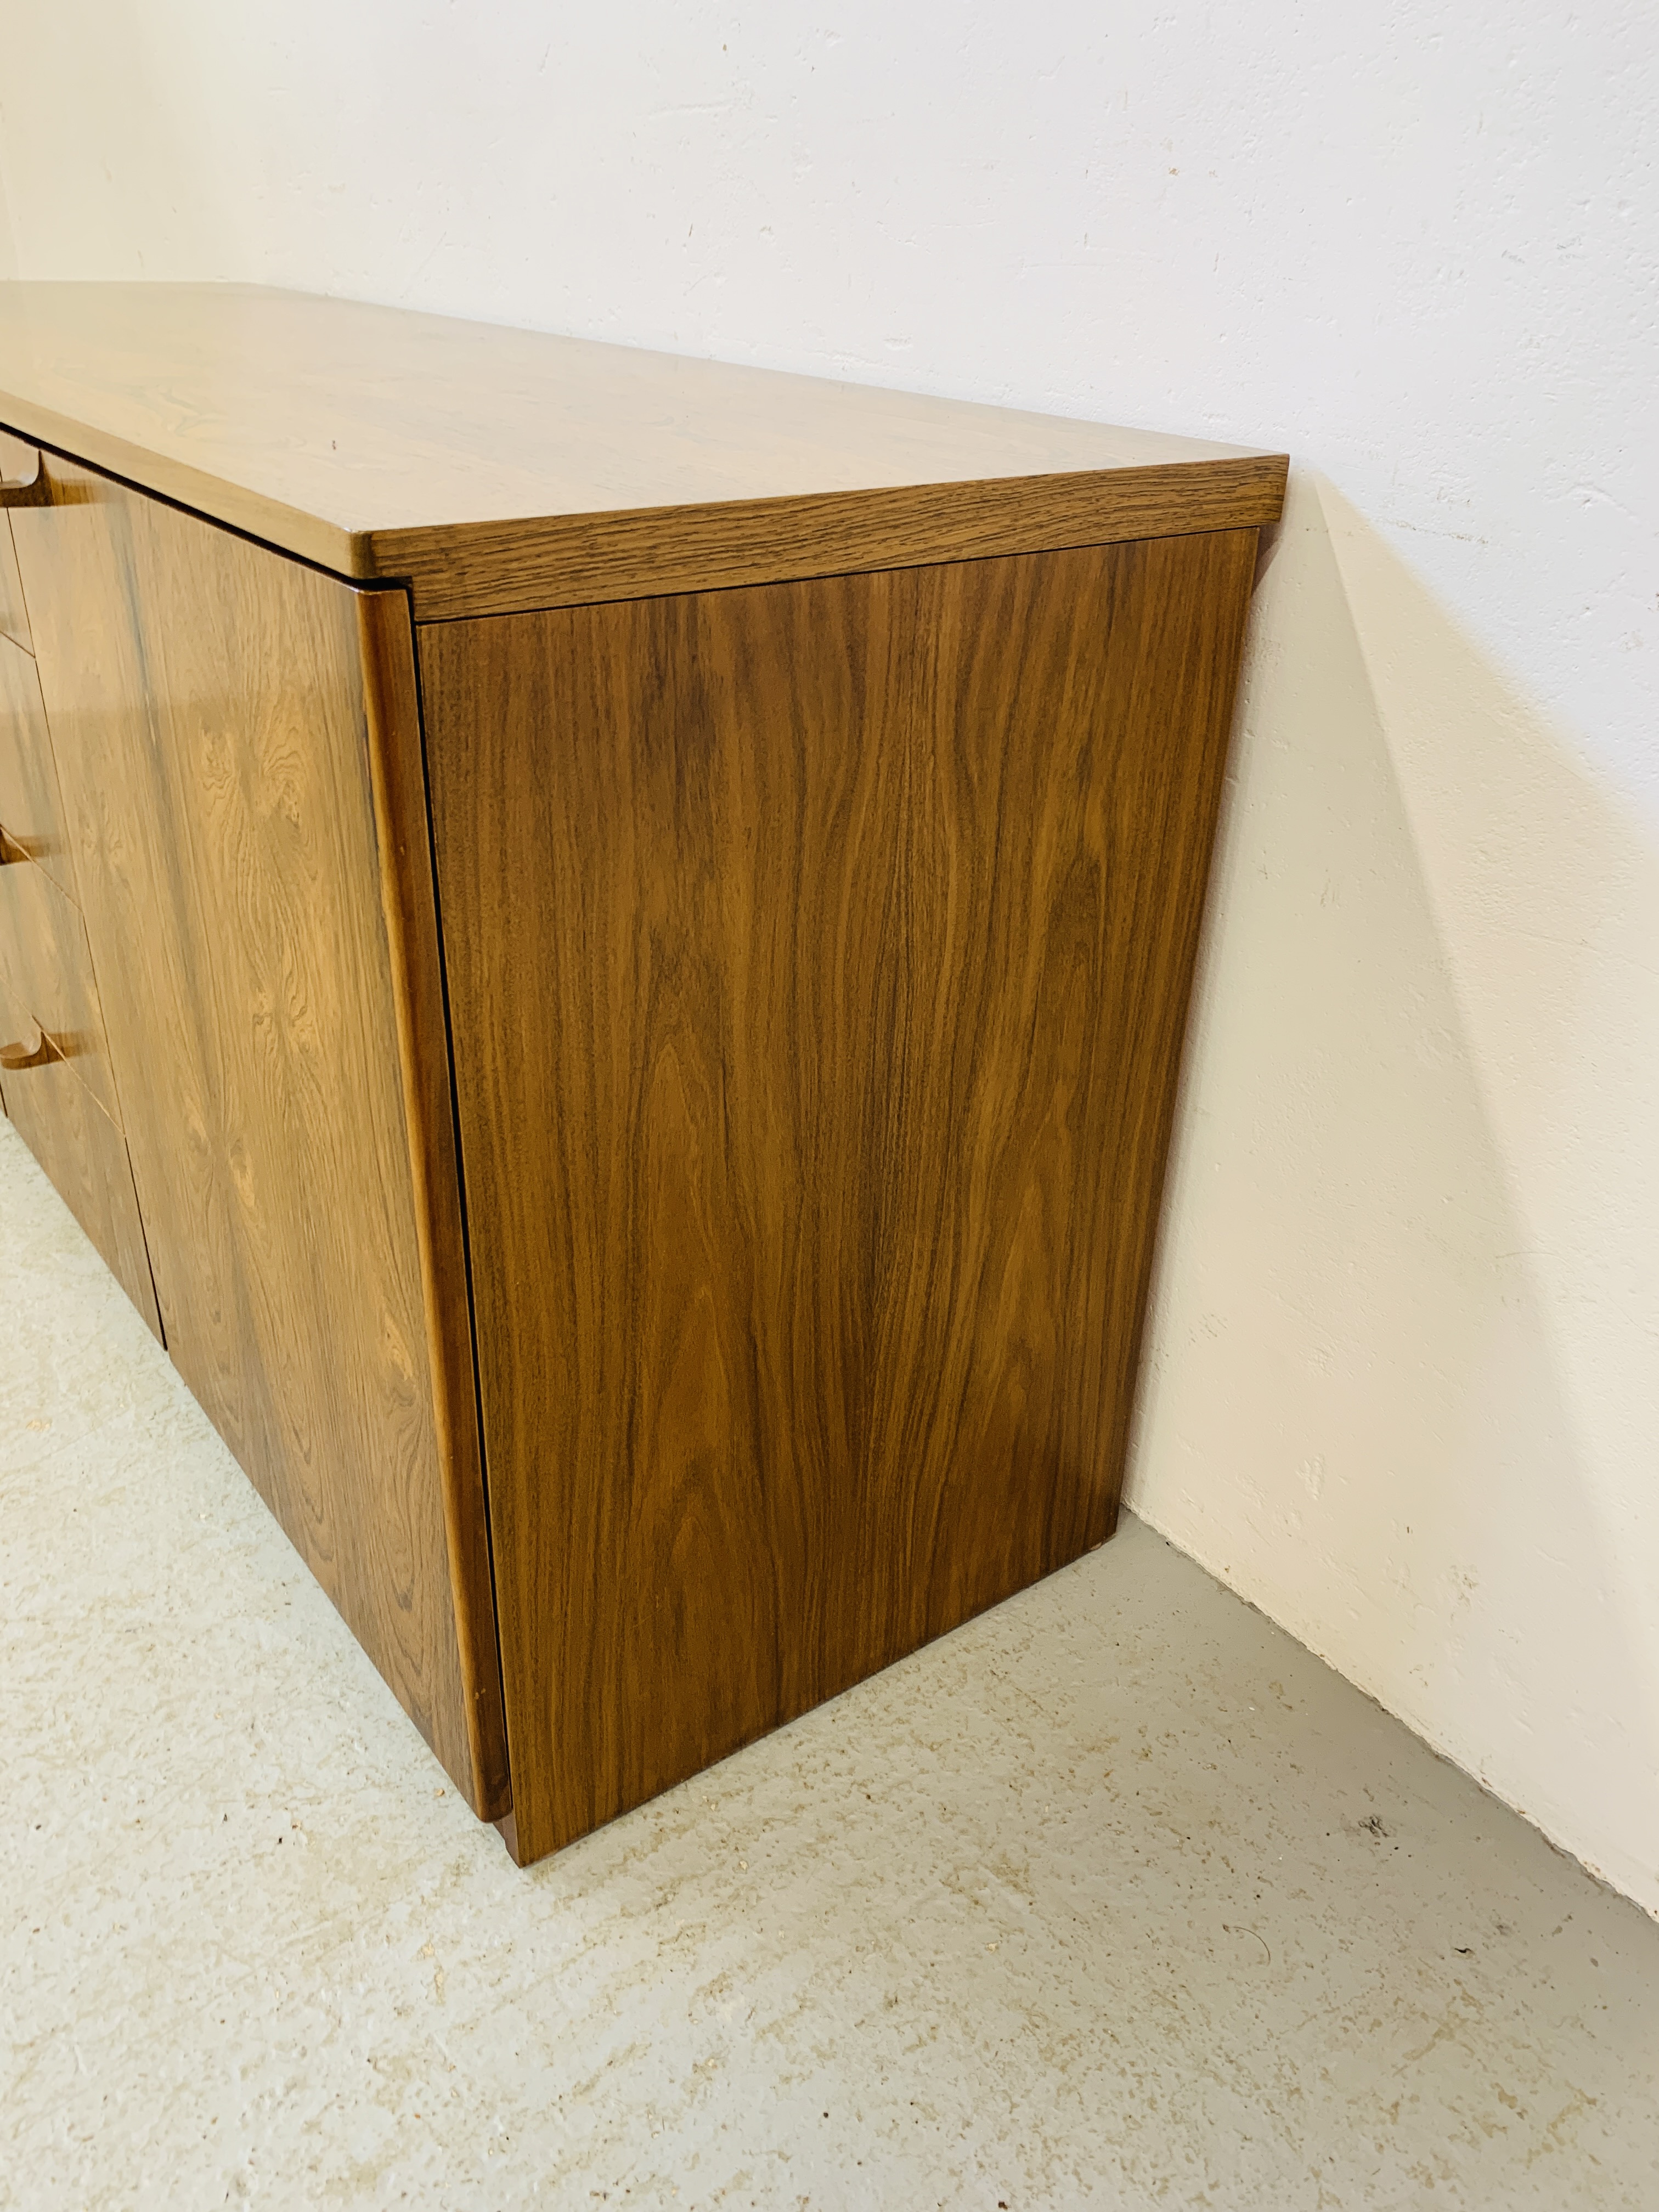 A C20TH BRAZILIAN ROSEWOOD RETRO SIDEBOARD HAVING FOUR CENTRAL DRAWERS FLANKED BY CUPBOARDS TO - Image 10 of 15